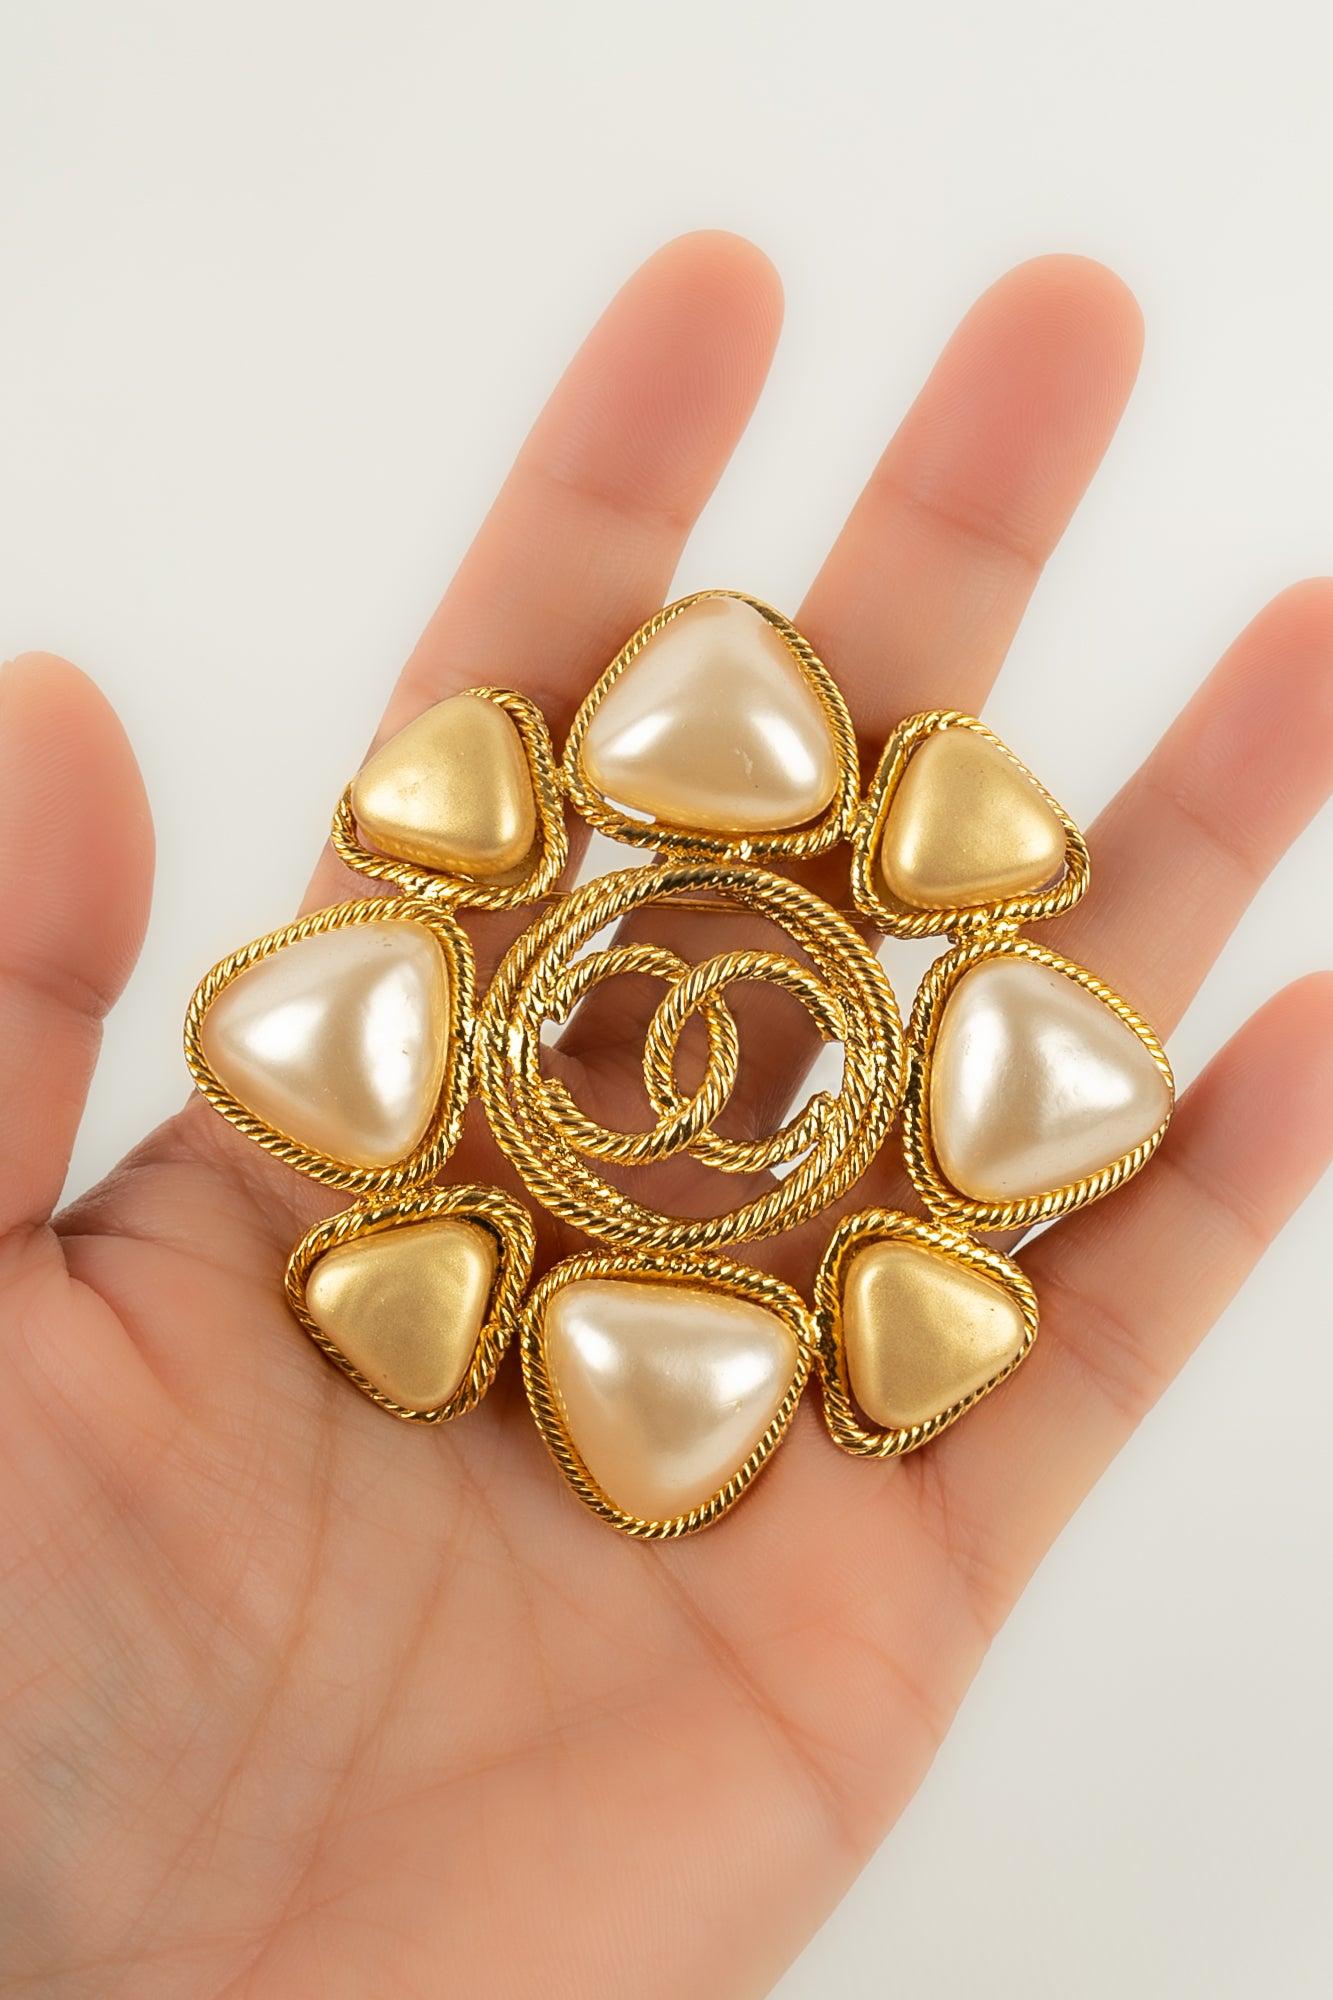 Chanel - (Made in France) Brooch in gold-plated metal and pearly glass paste. 2cc8 Collection.

Additional information:
Condition: Very good condition
Dimensions: Height: 7 cm
Period: 20th Century

Seller Reference: BRB40
